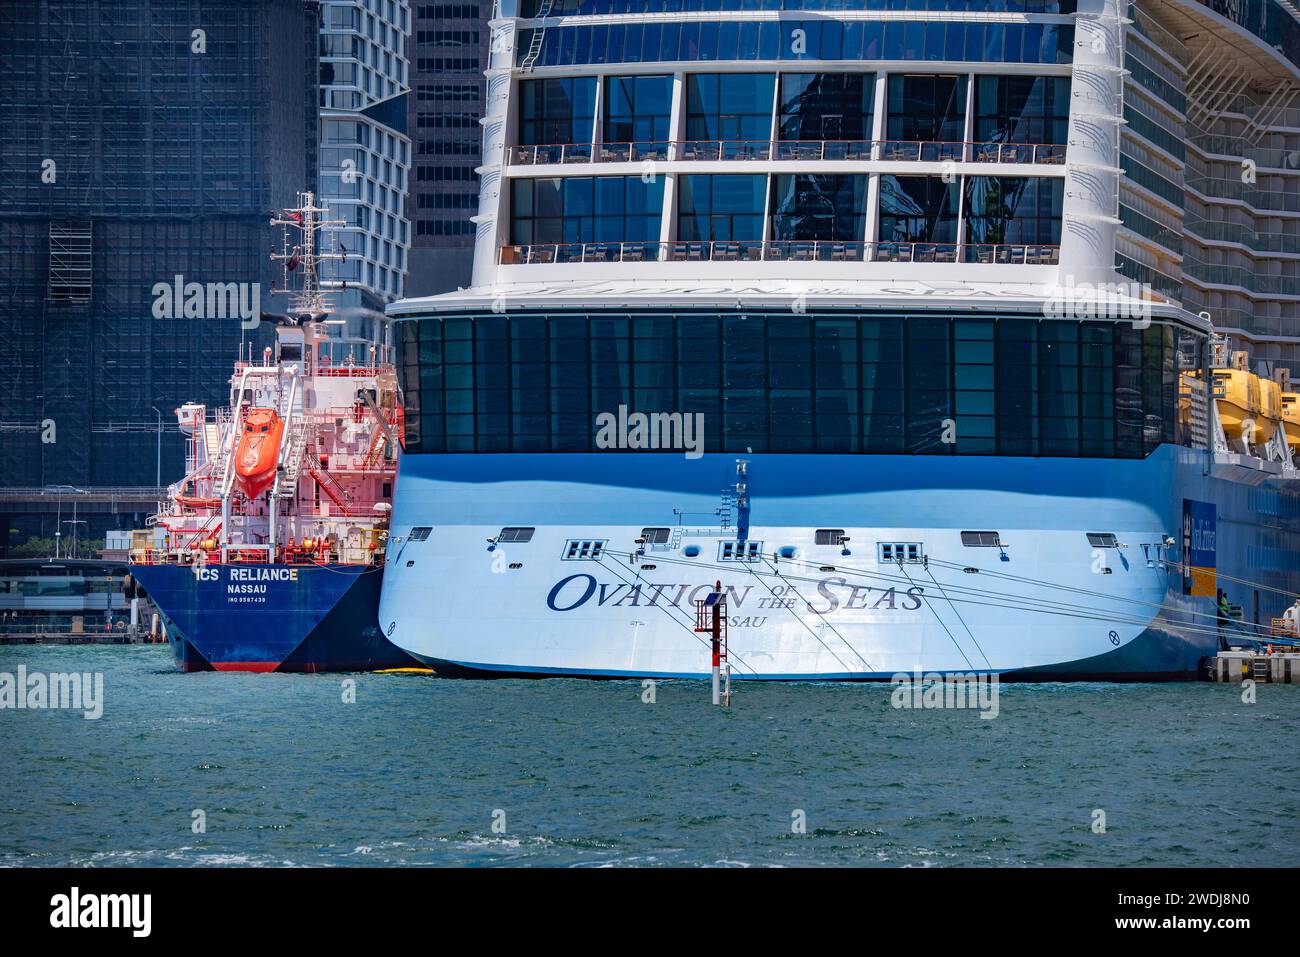 ICS RELIANCE refueling Cruise Ship Ovation of the Seas at the Overseas Passenger Terminal, is a 2011 built Oil Products Tanker or bunker ship Stock Photo